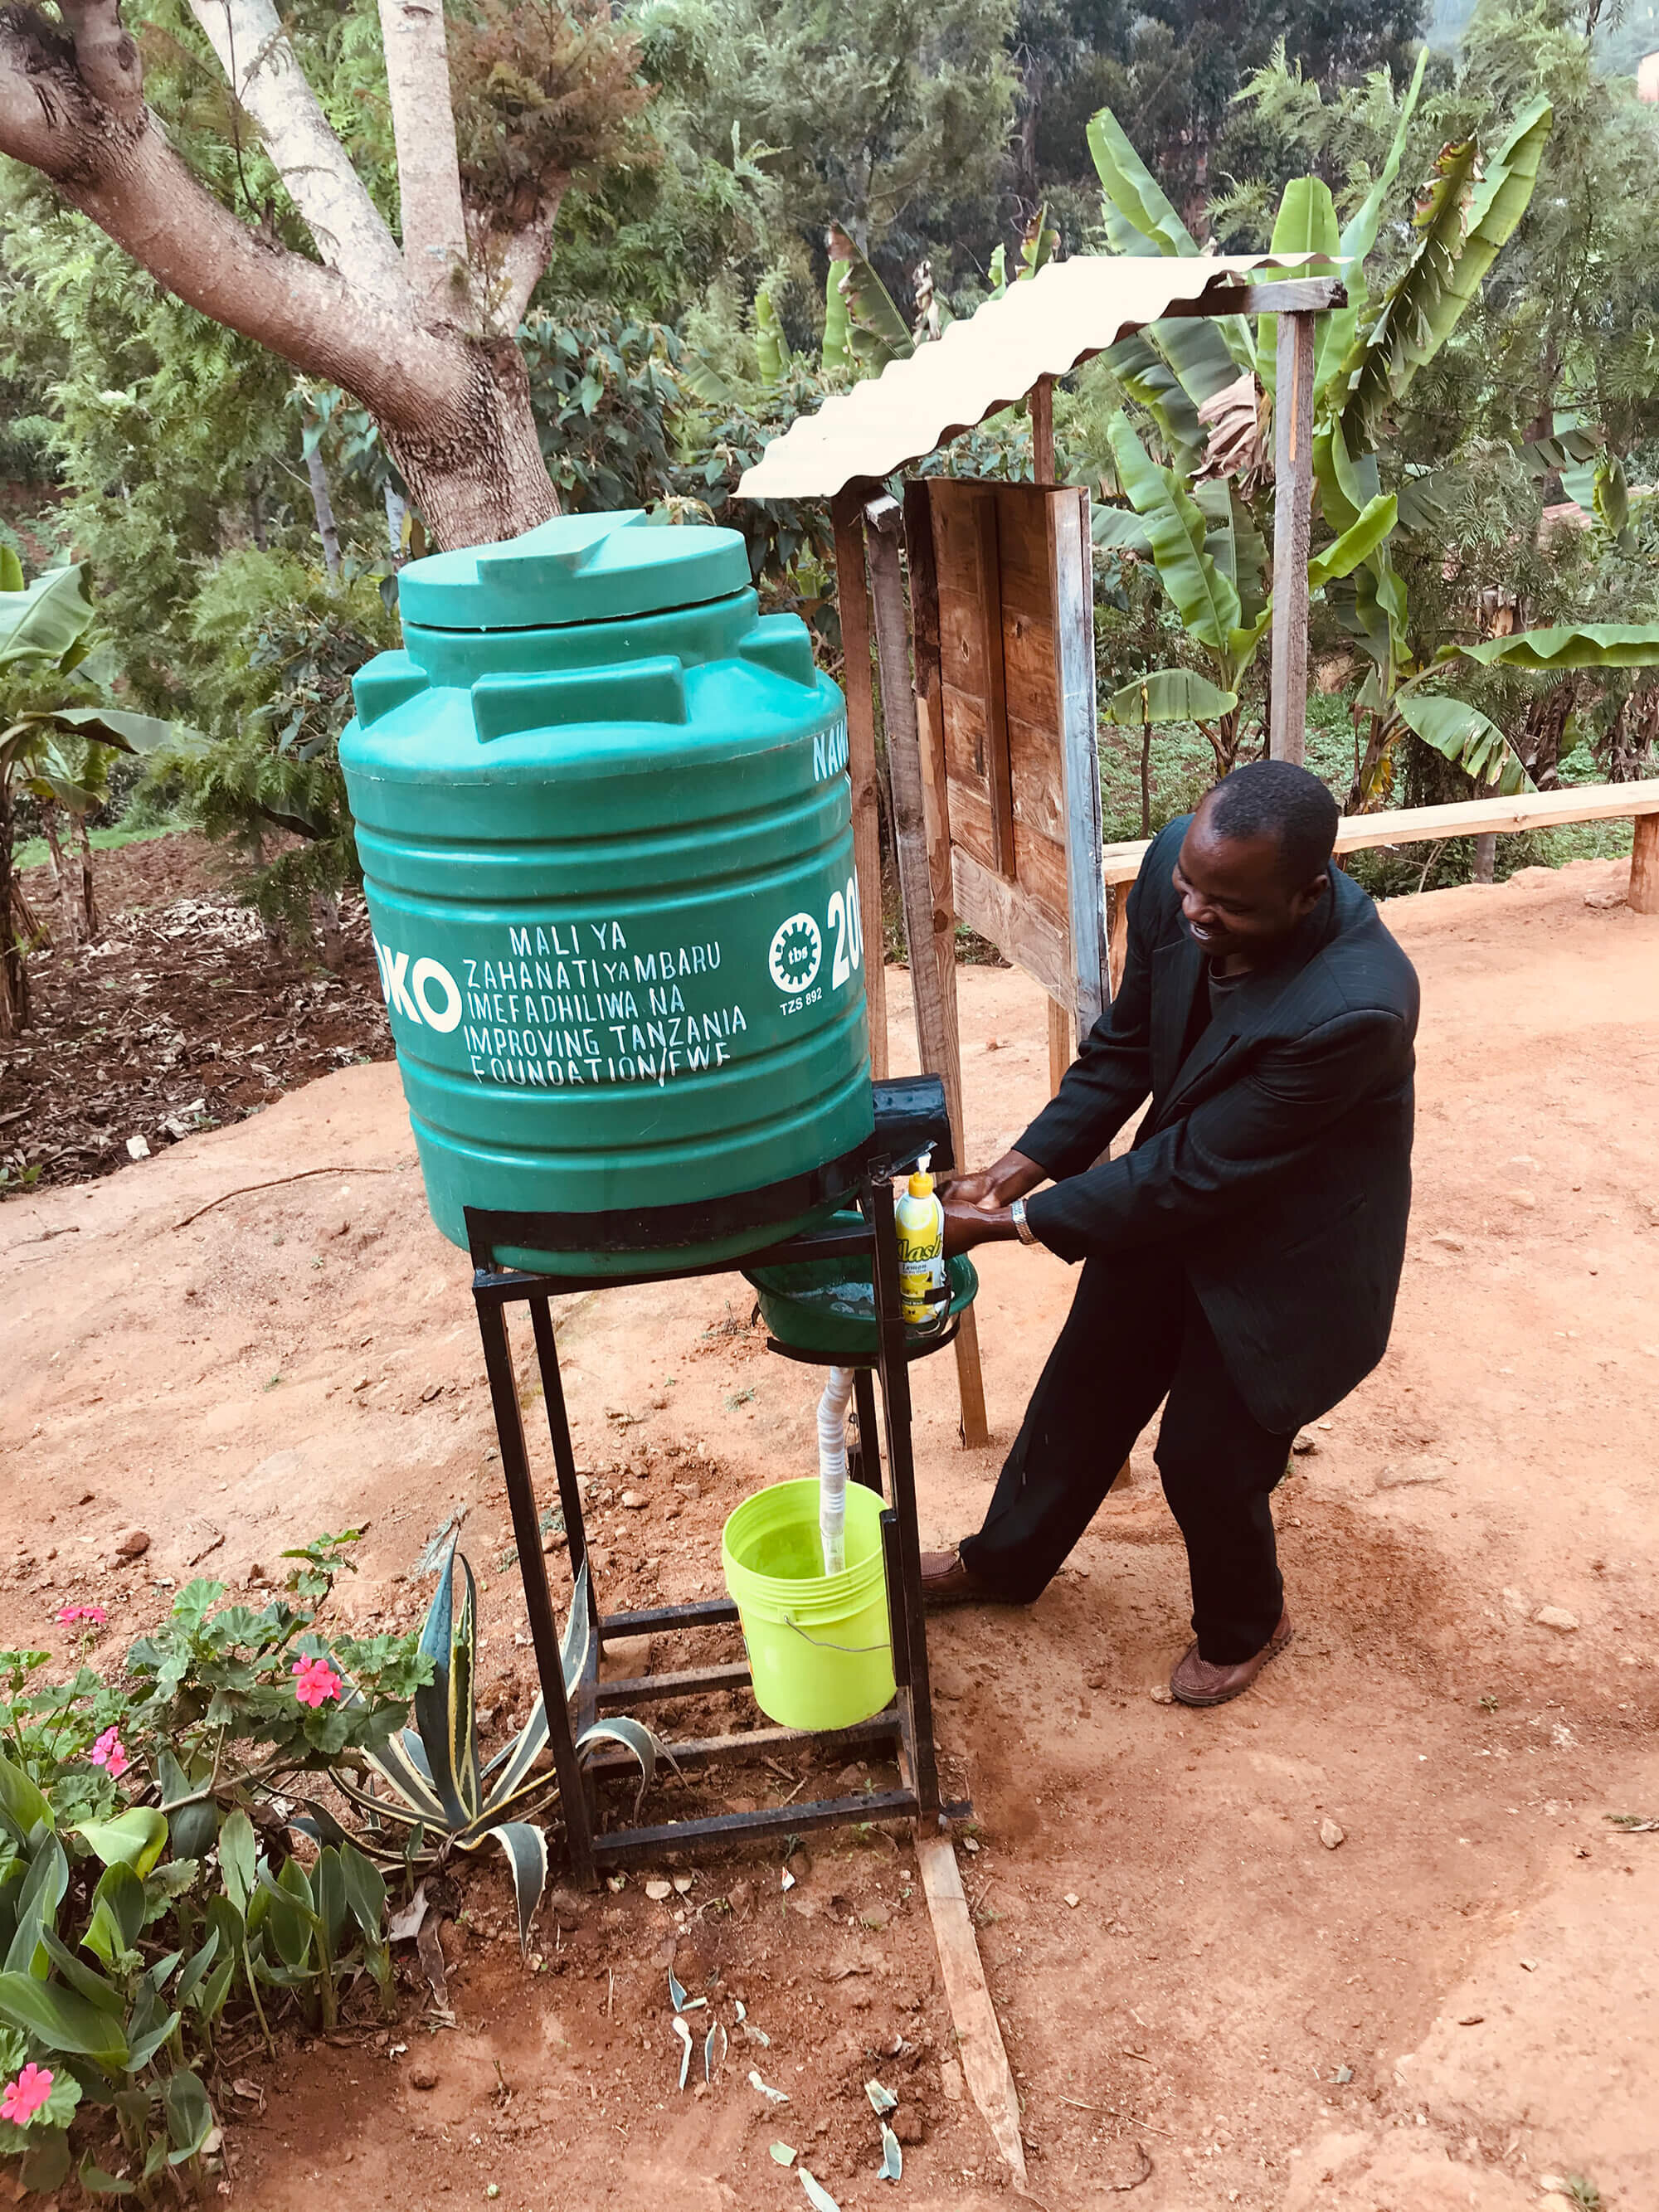  Hand-washing unit delivered to Mbaru health clinic&nbsp;. 